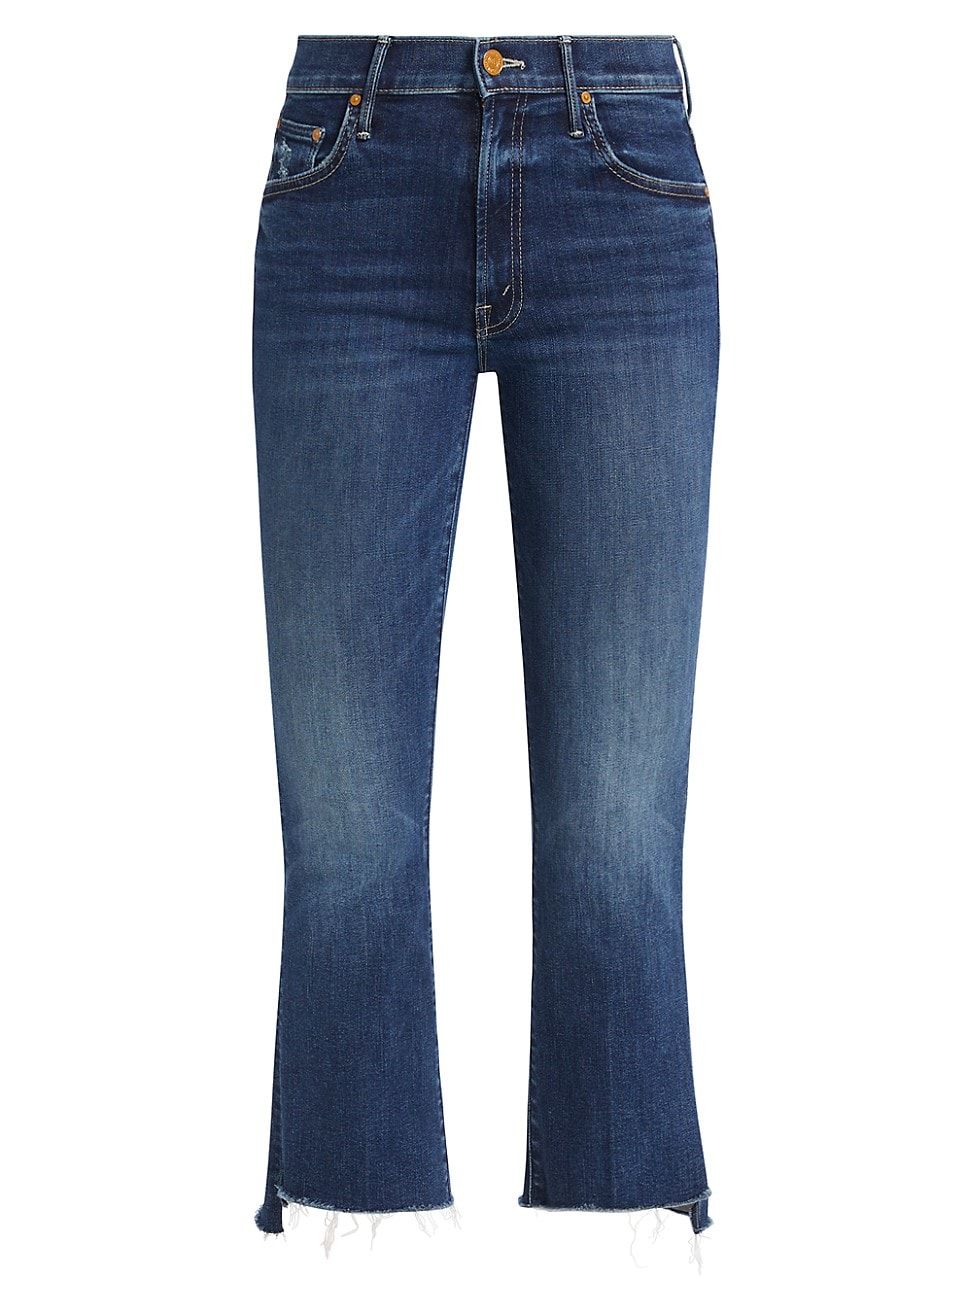 Women's The Insider Crop Jeans - Teaming Up - Size 24 | Saks Fifth Avenue